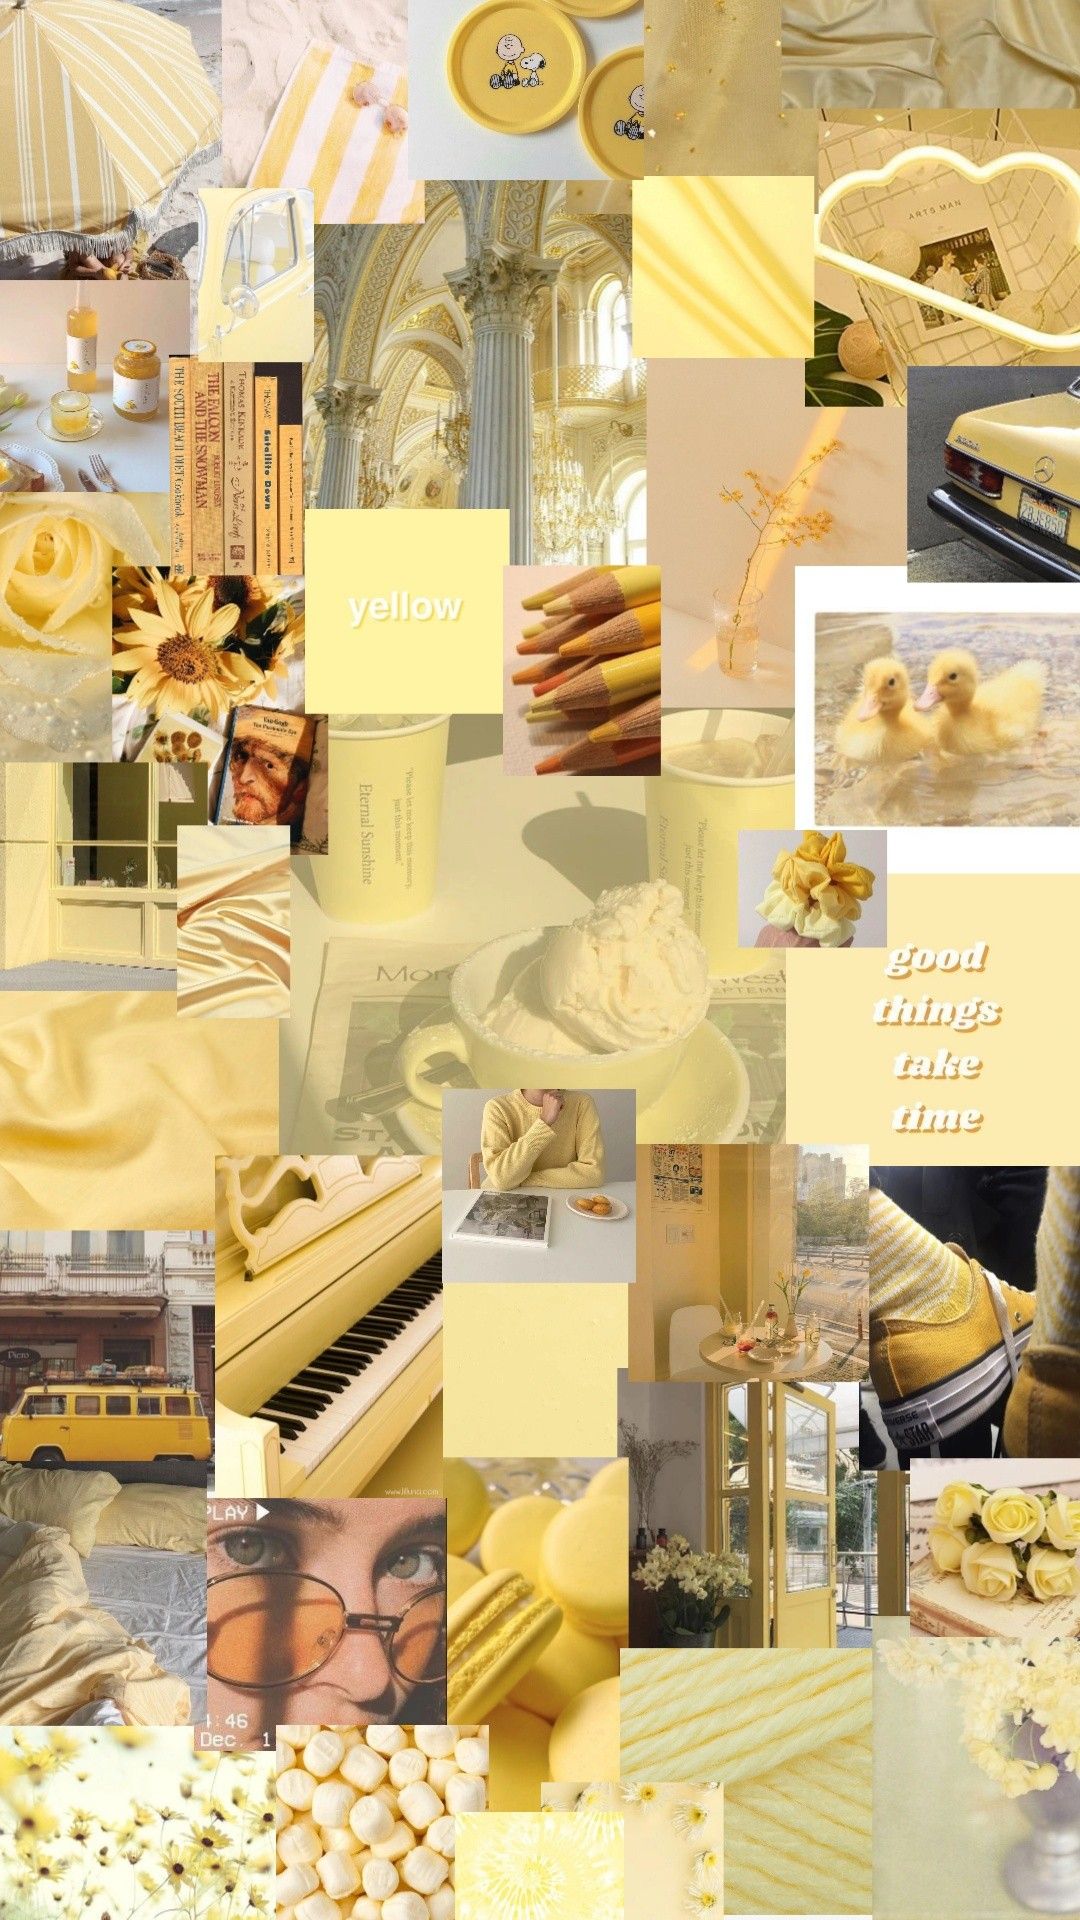 A collage of pictures with yellow backgrounds - Pastel yellow, light yellow